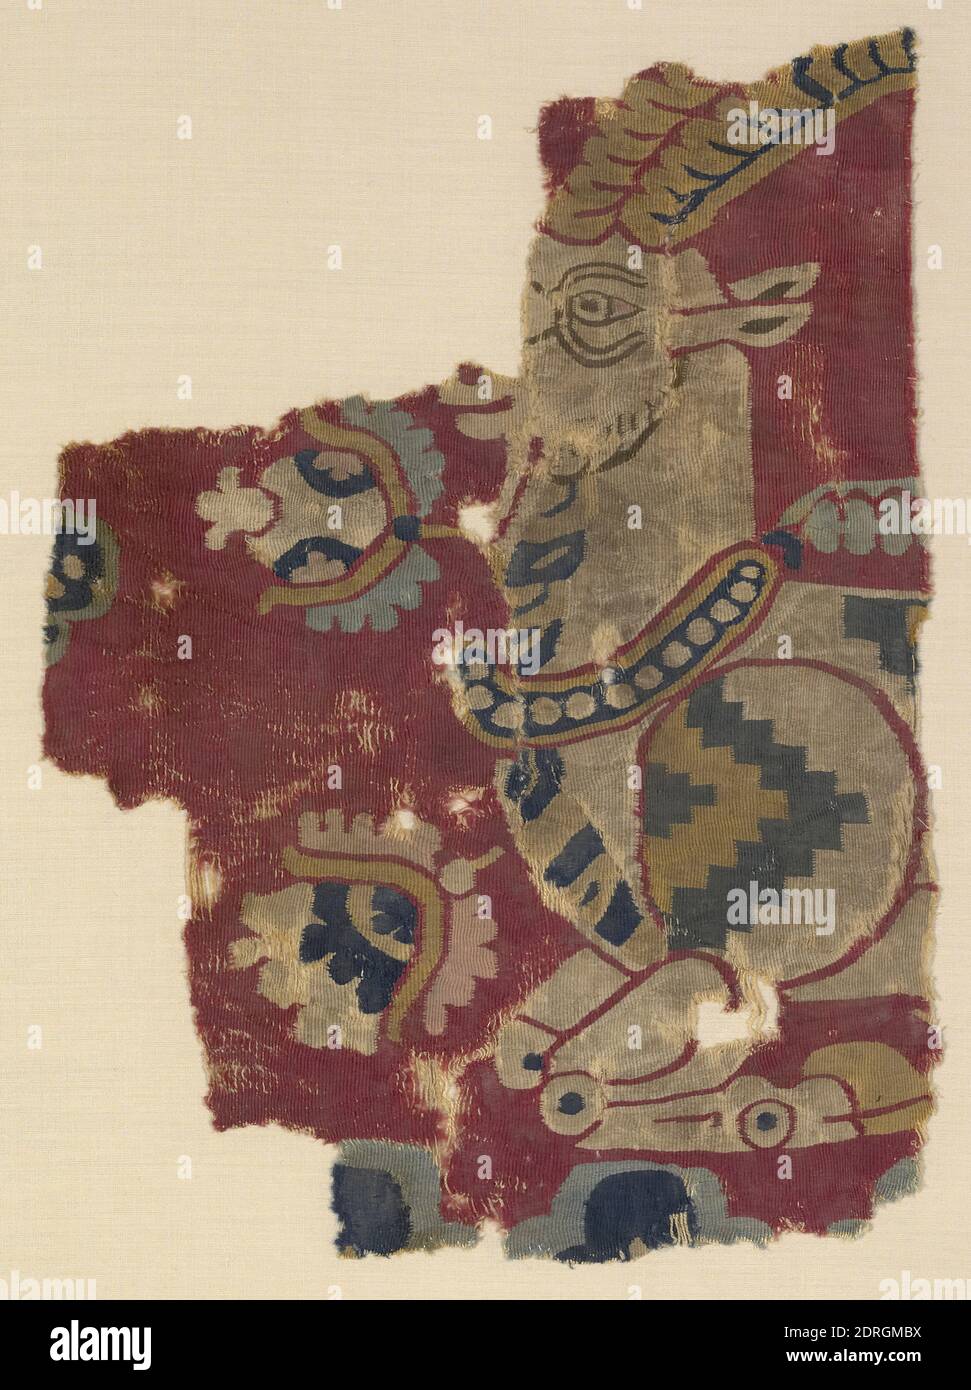 Textile Fragment with an Ibex, 6th–early 7th century c.e., Wool, dovetailed-tapestry weave, 10 13/16 × 14 15/16 in. (27.5 × 38 cm), The leaping ibex on this tapestry appears to be a royal icon, so designated by his collar, with its jewels and fluttering ribbons. The ibex has an affinity to the wild goats found on prehistoric painted pottery, but is depicted here in an Achaemenid manner: haughty, with characteristic double lines around the almost human eyes, the neck drawn stiffly back., Iranian/Persian, Sassanian Empire (224–651 C.E.), Textiles Stock Photo